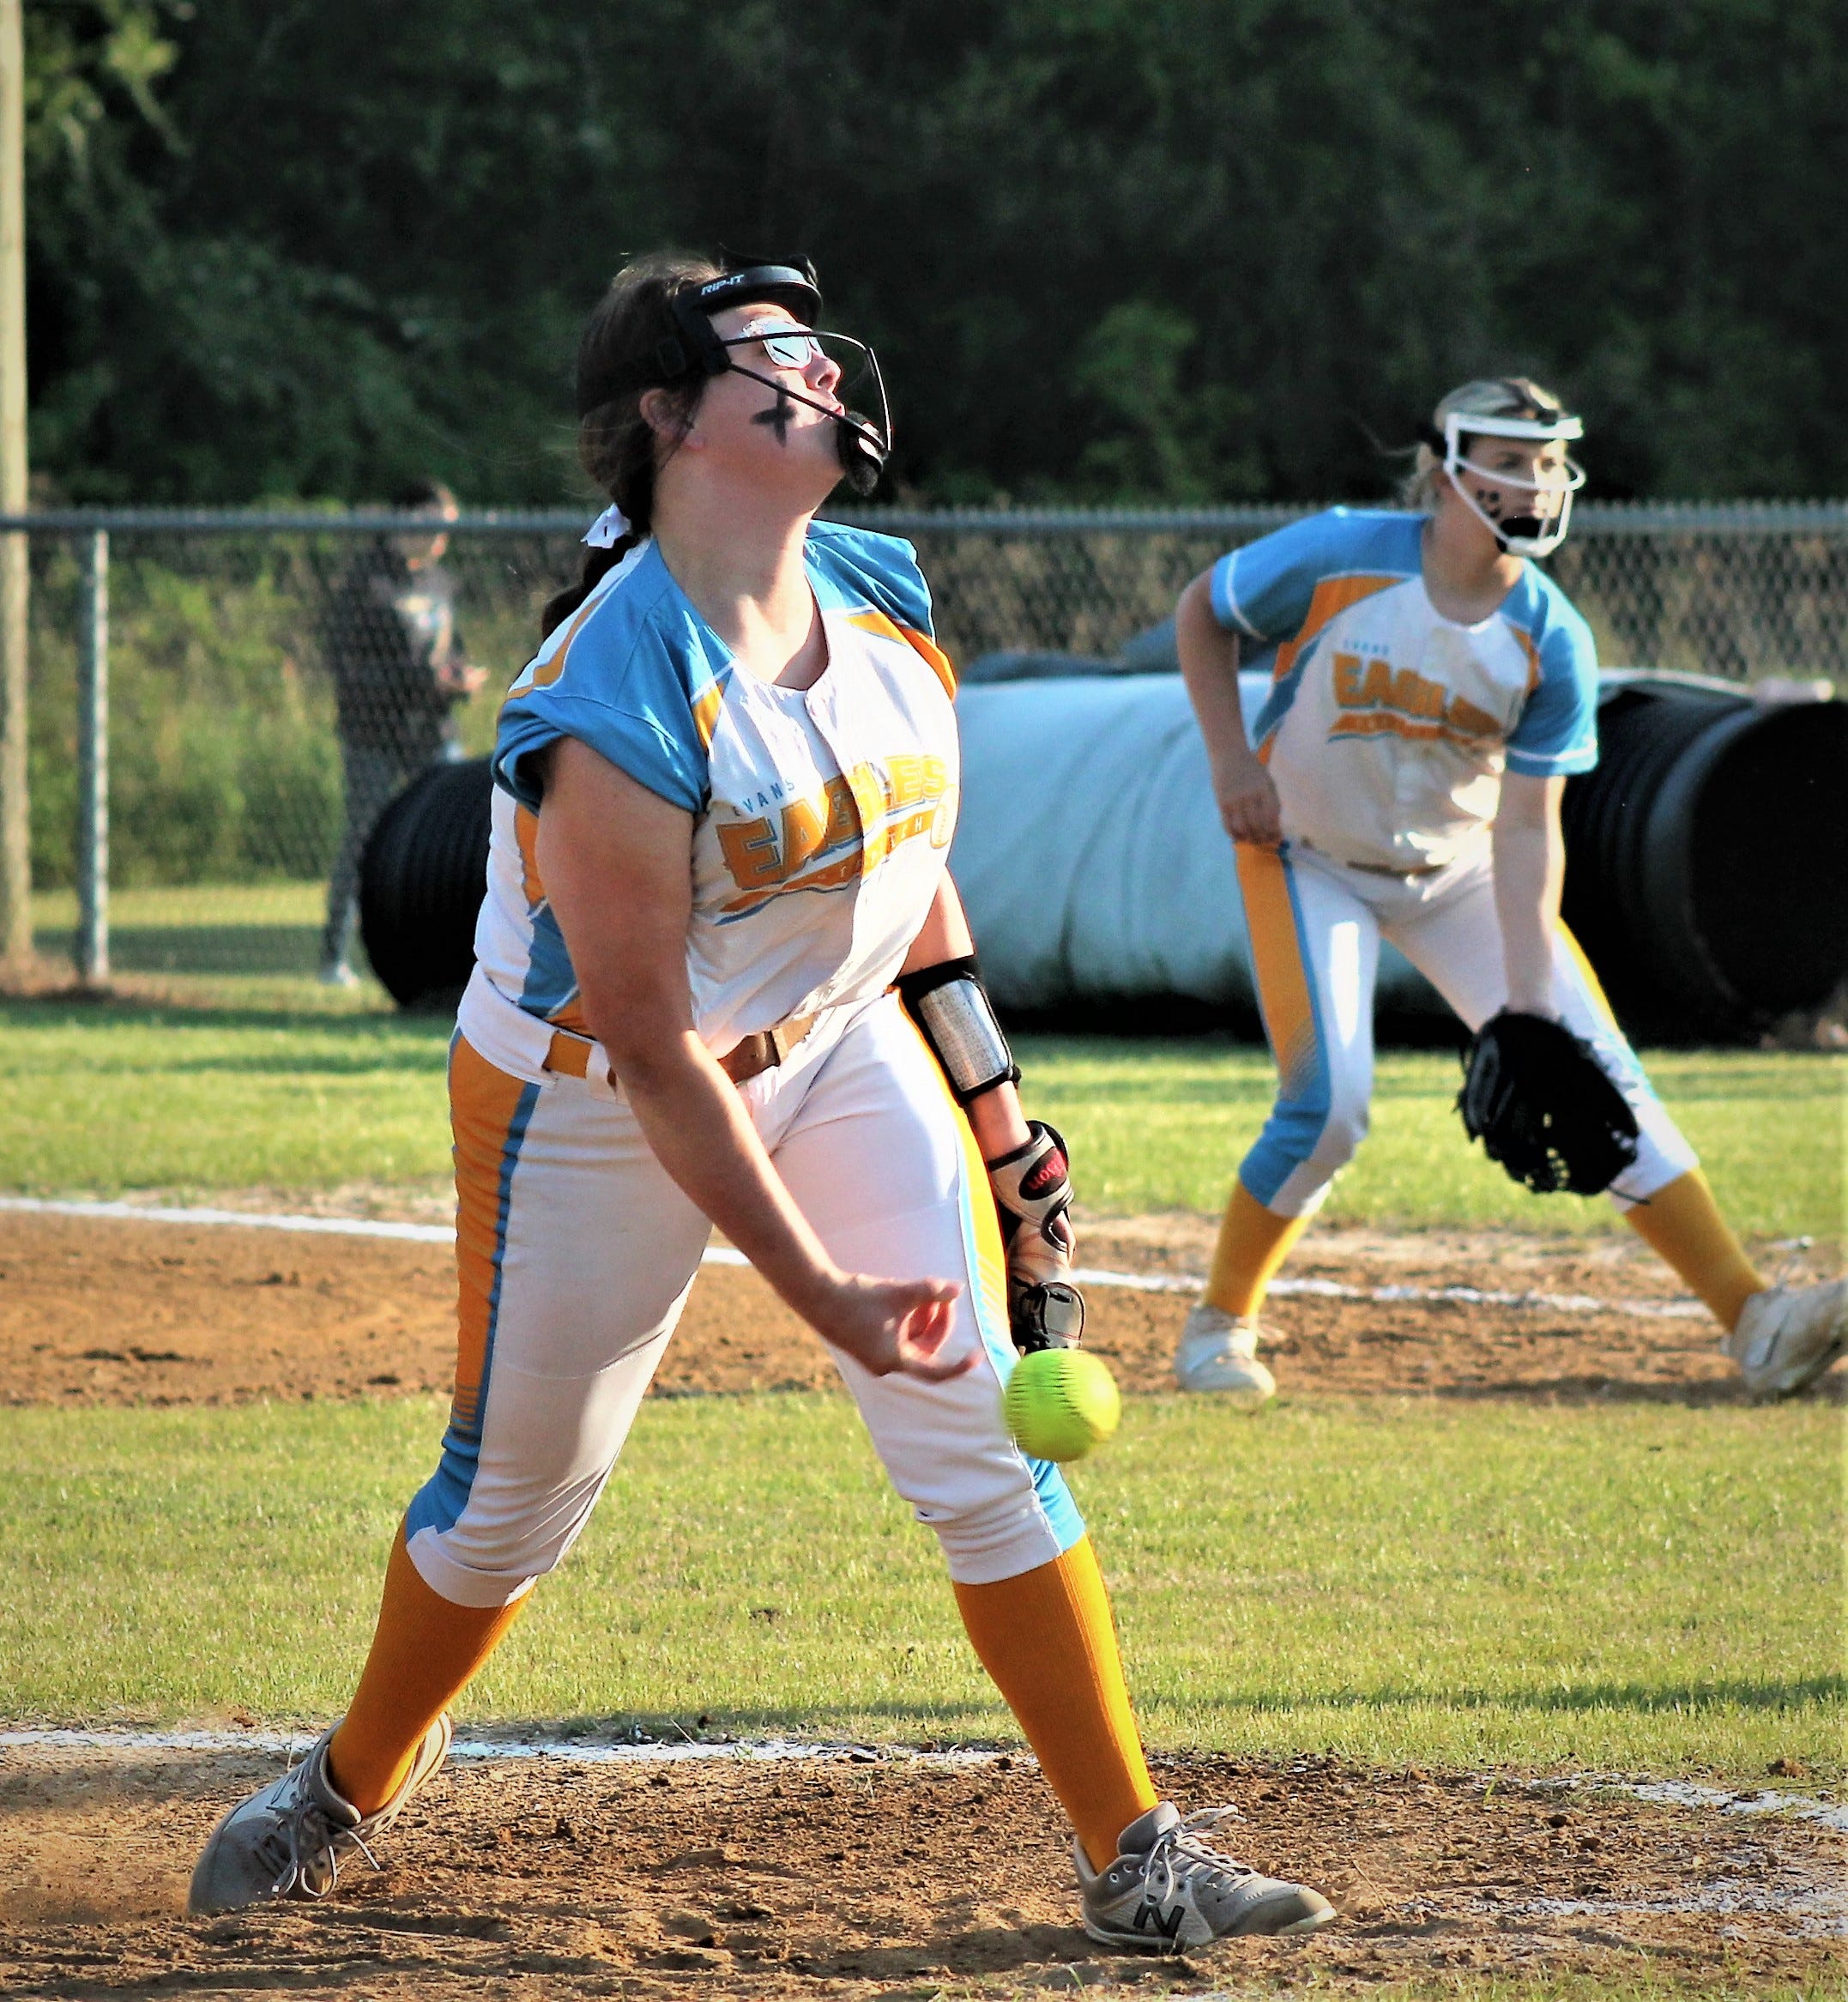 Evans pitcher Sadie Jeane fires a pitch to a batter during the second inning. Evans squeaked past Hicks, 5-4.